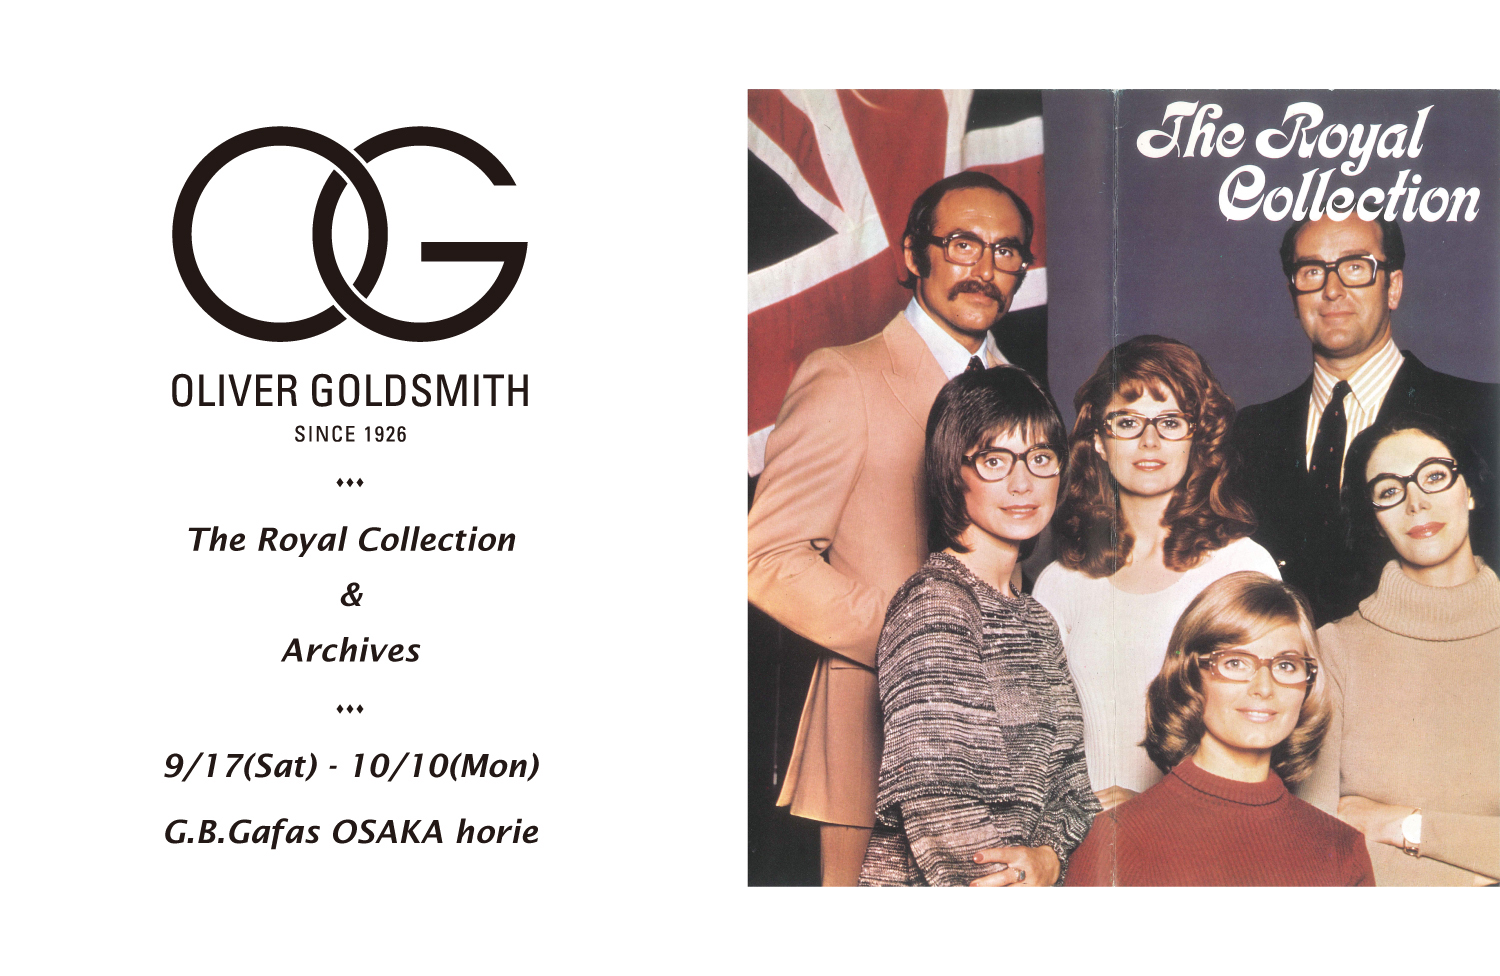 OLIVER GOLDSMITH The Royal Collection & Archives